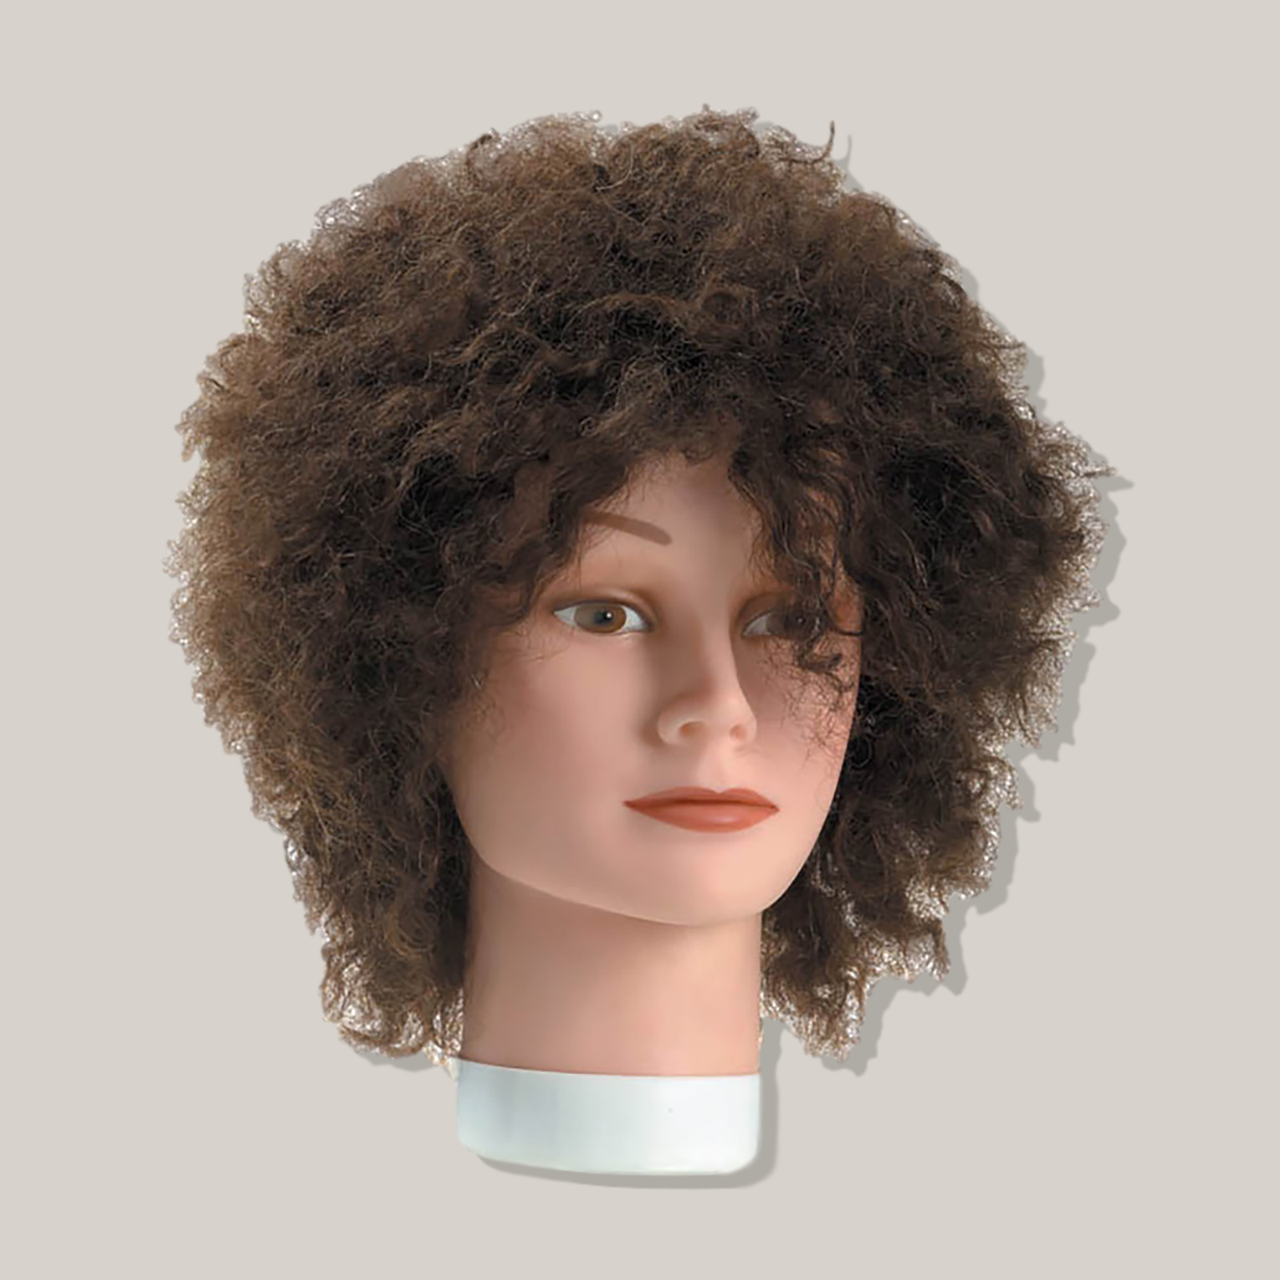 Dannyco Frizzy Hair Mannequin #CP355C 